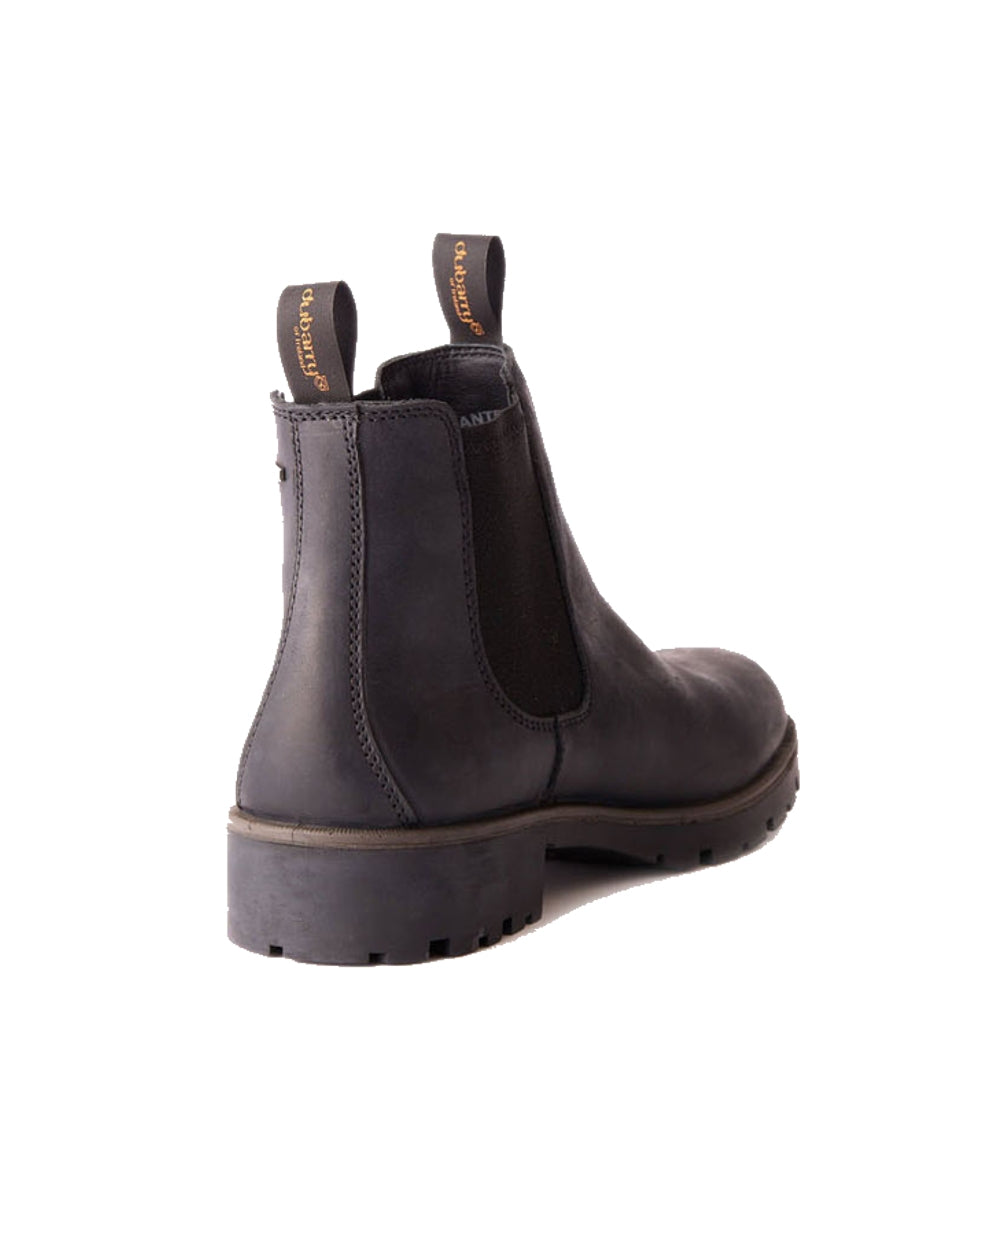 Dubarry Antrim Country Boots in Black 